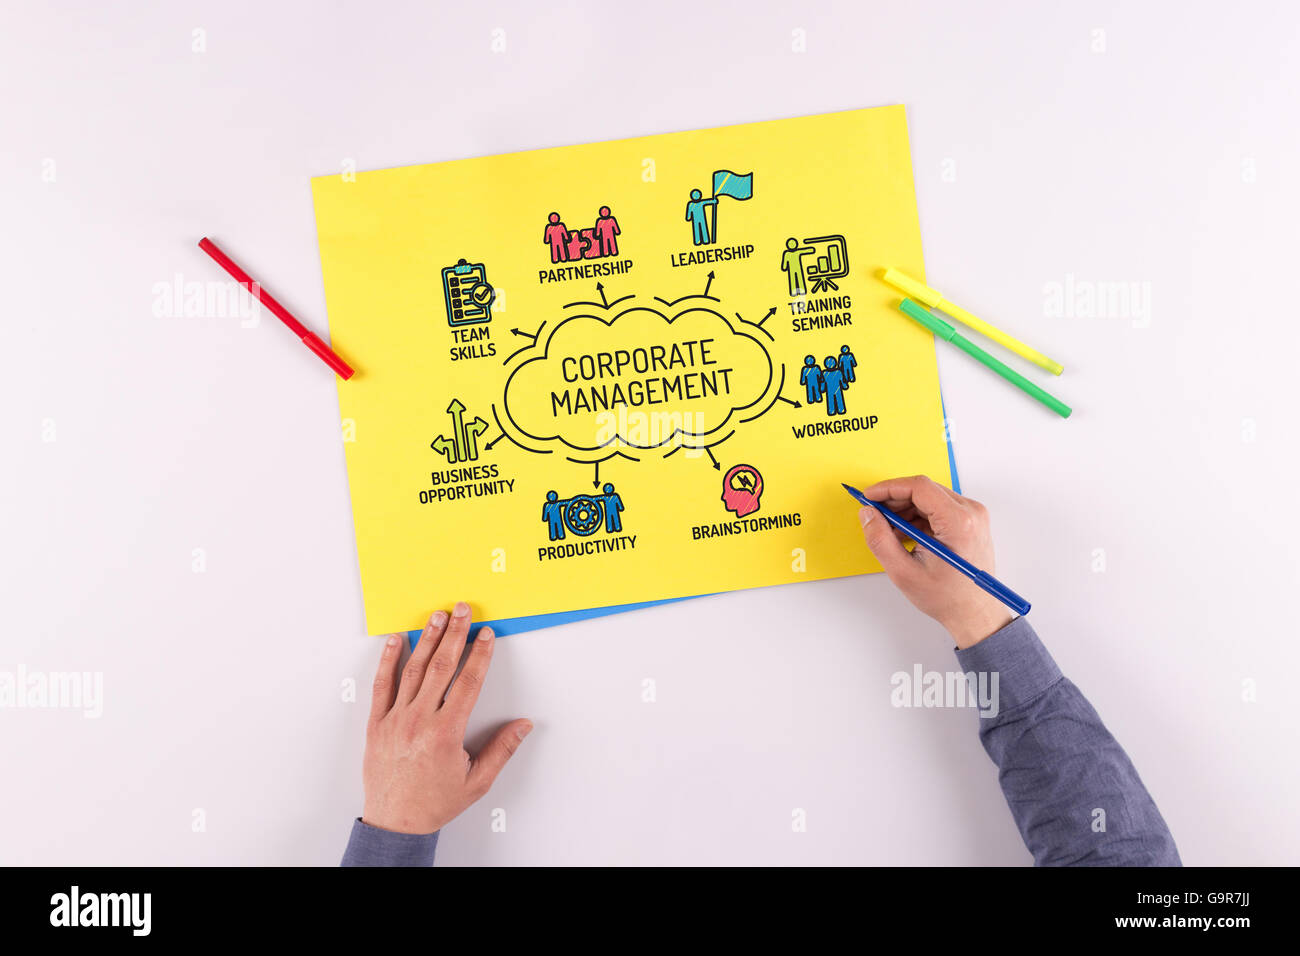 Corporate Management chart with keywords and sketch icons Stock Photo